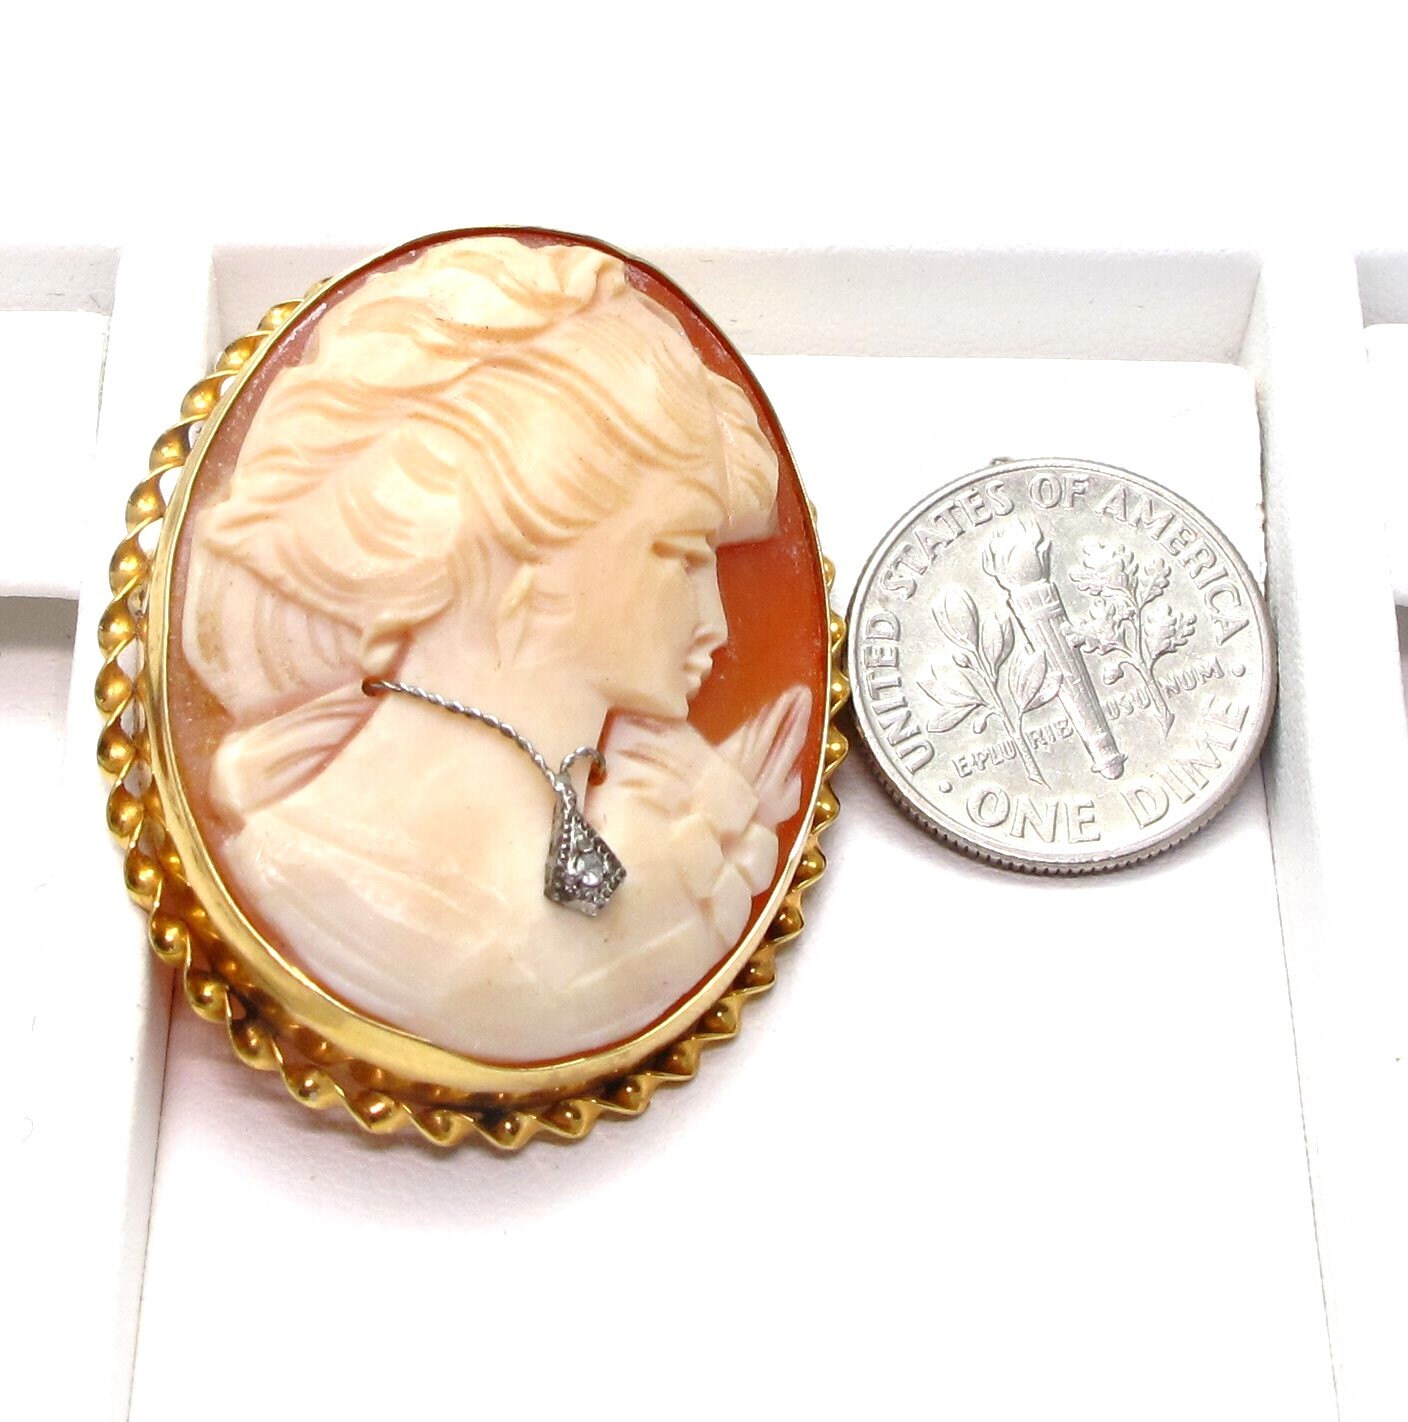 14k Carved Shell Cameo Diamond Brooch Pin and Pendant 14k | Etsy